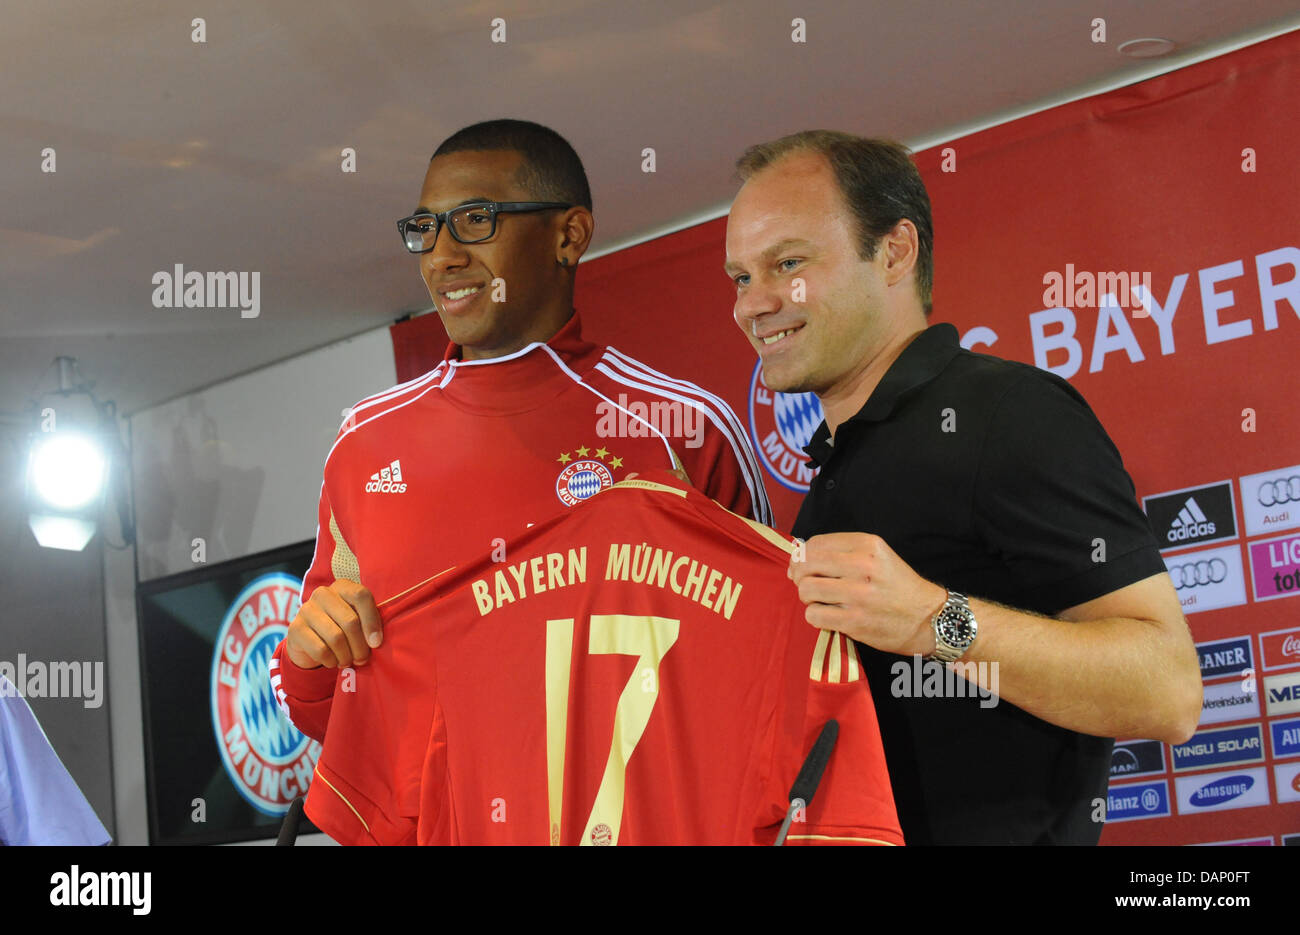 New FC Bayern Munich player Jerome Boateng (L) and manager Christian Nerlinger attend an introductory press conference at the Bundesliga club's facilities in Munich, Germany, 17 July 2011. Boateng and Nerlinger hold Boateng's new jersey. Photo: Andreas Gebert Stock Photo